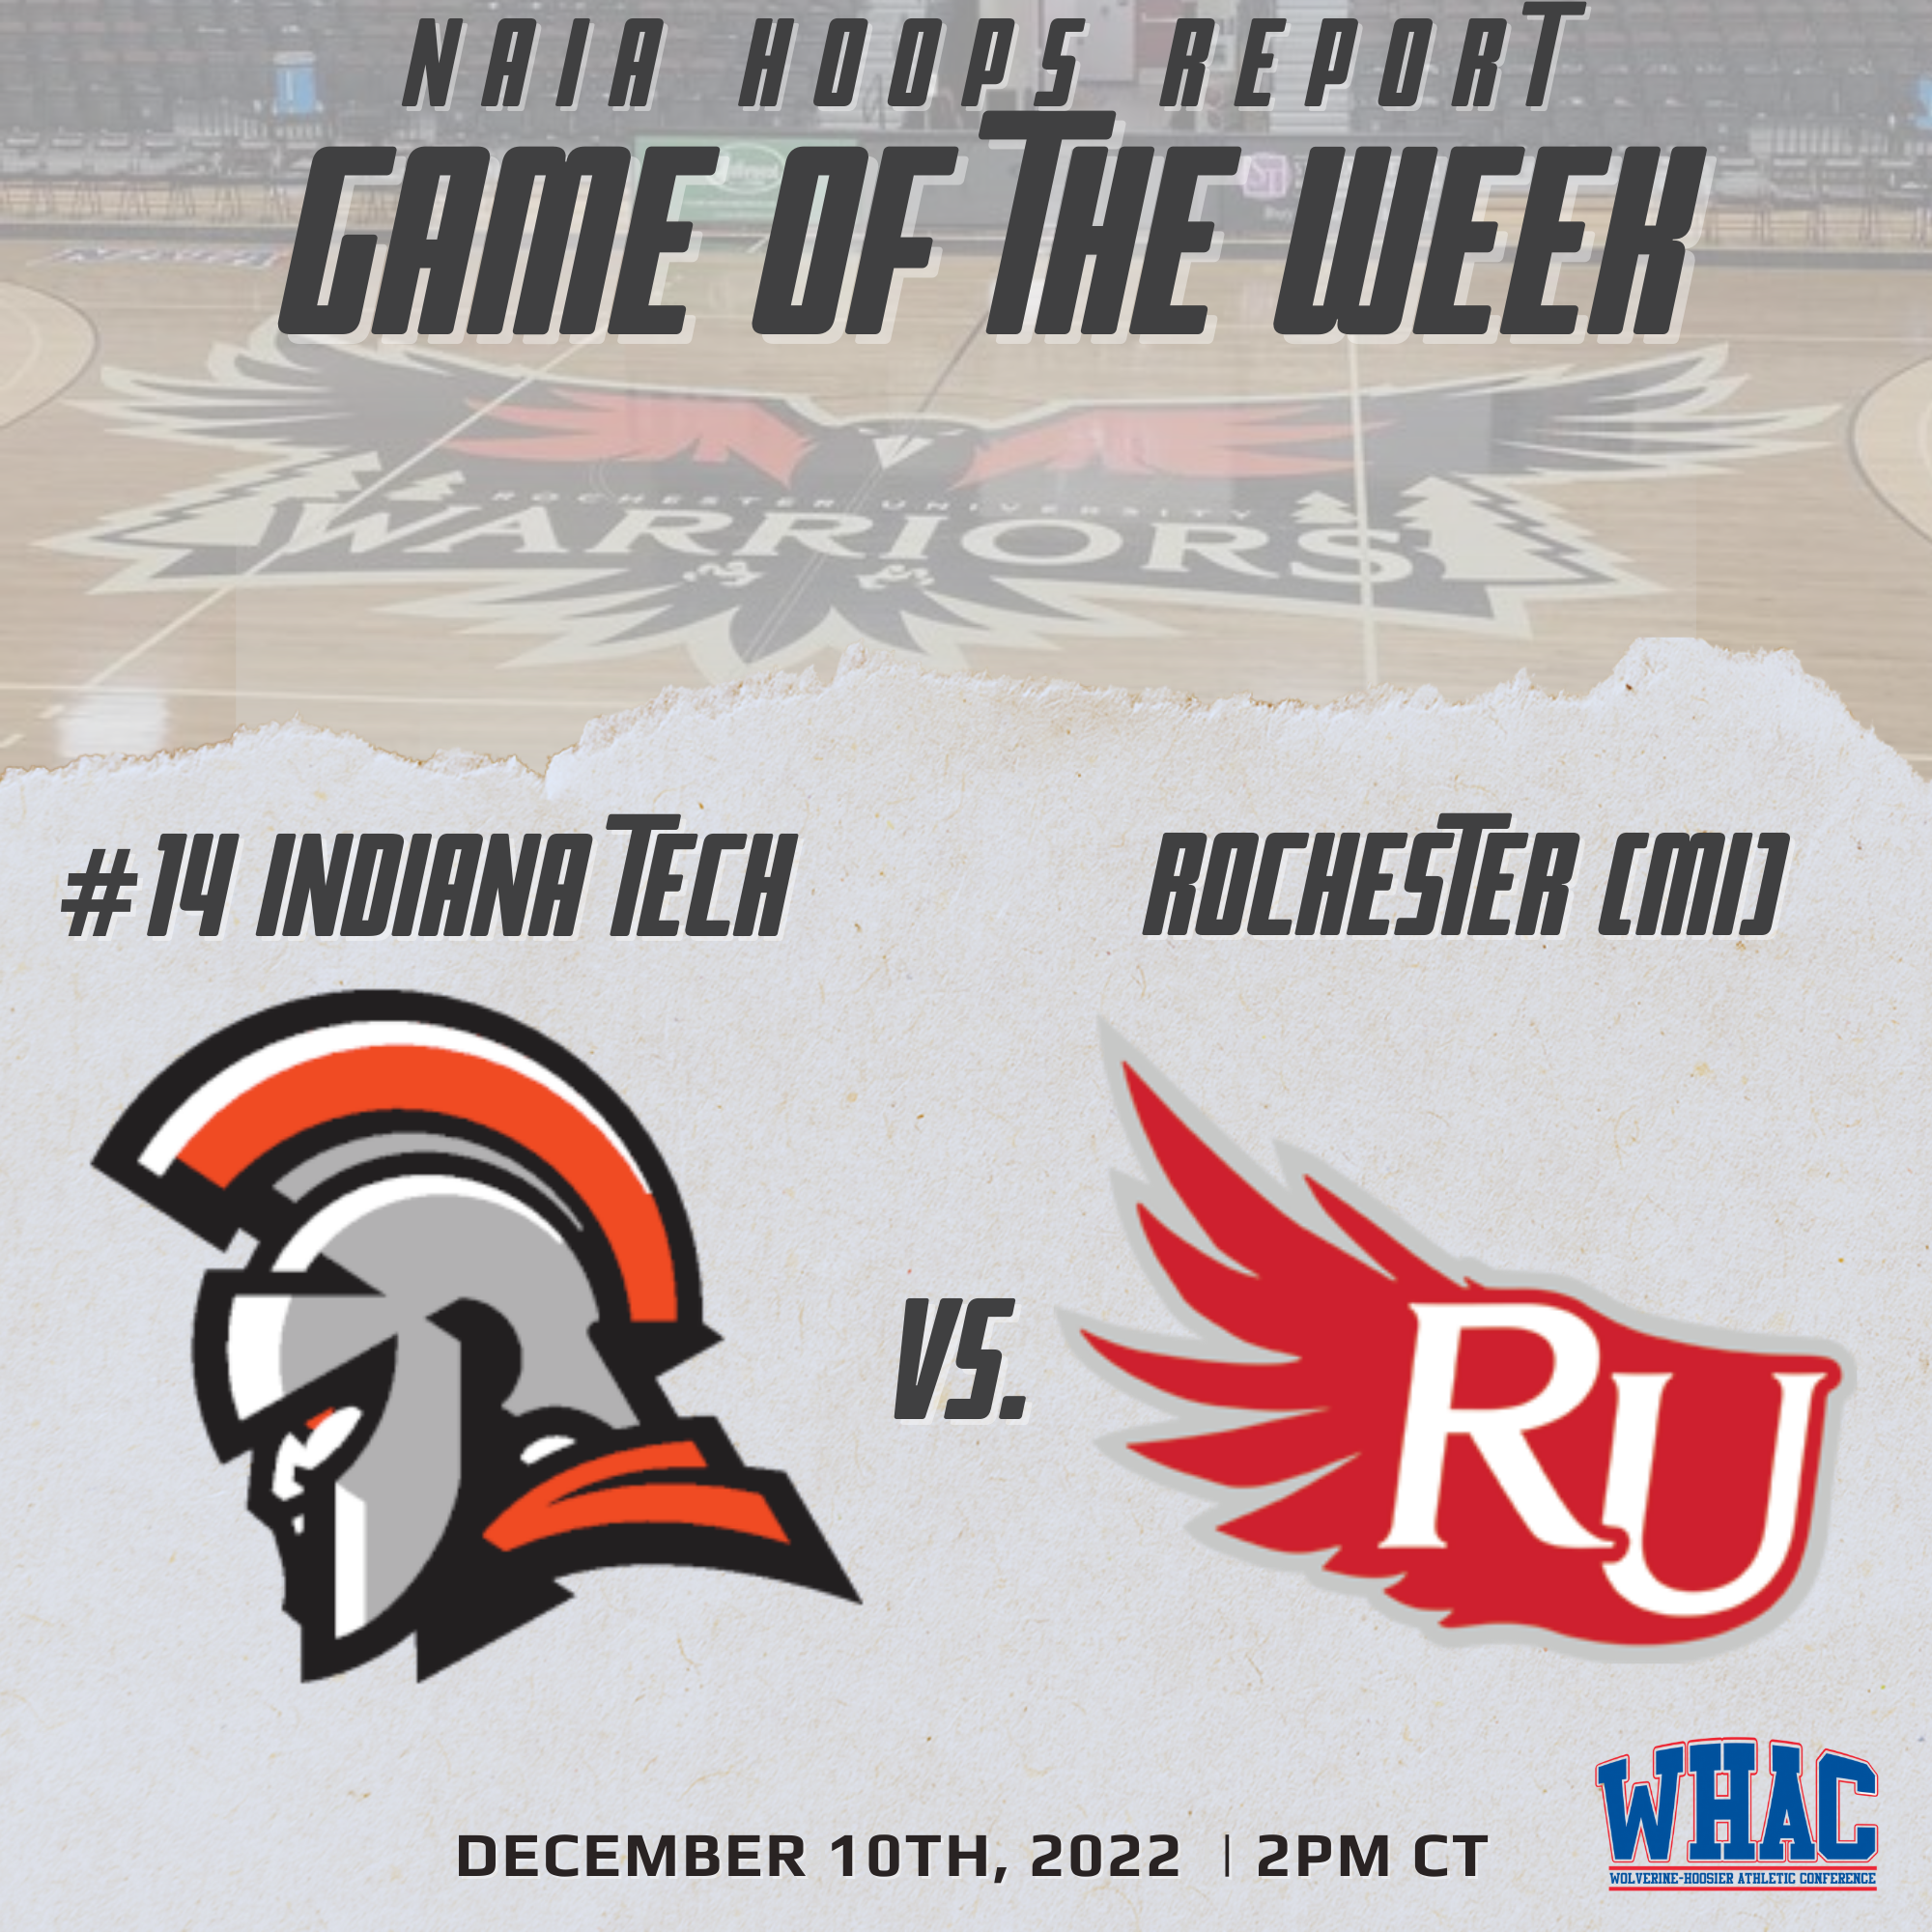 NAIA Hoops Report Game of the Week: No. 14 Indiana Tech @ Rochester (MI)